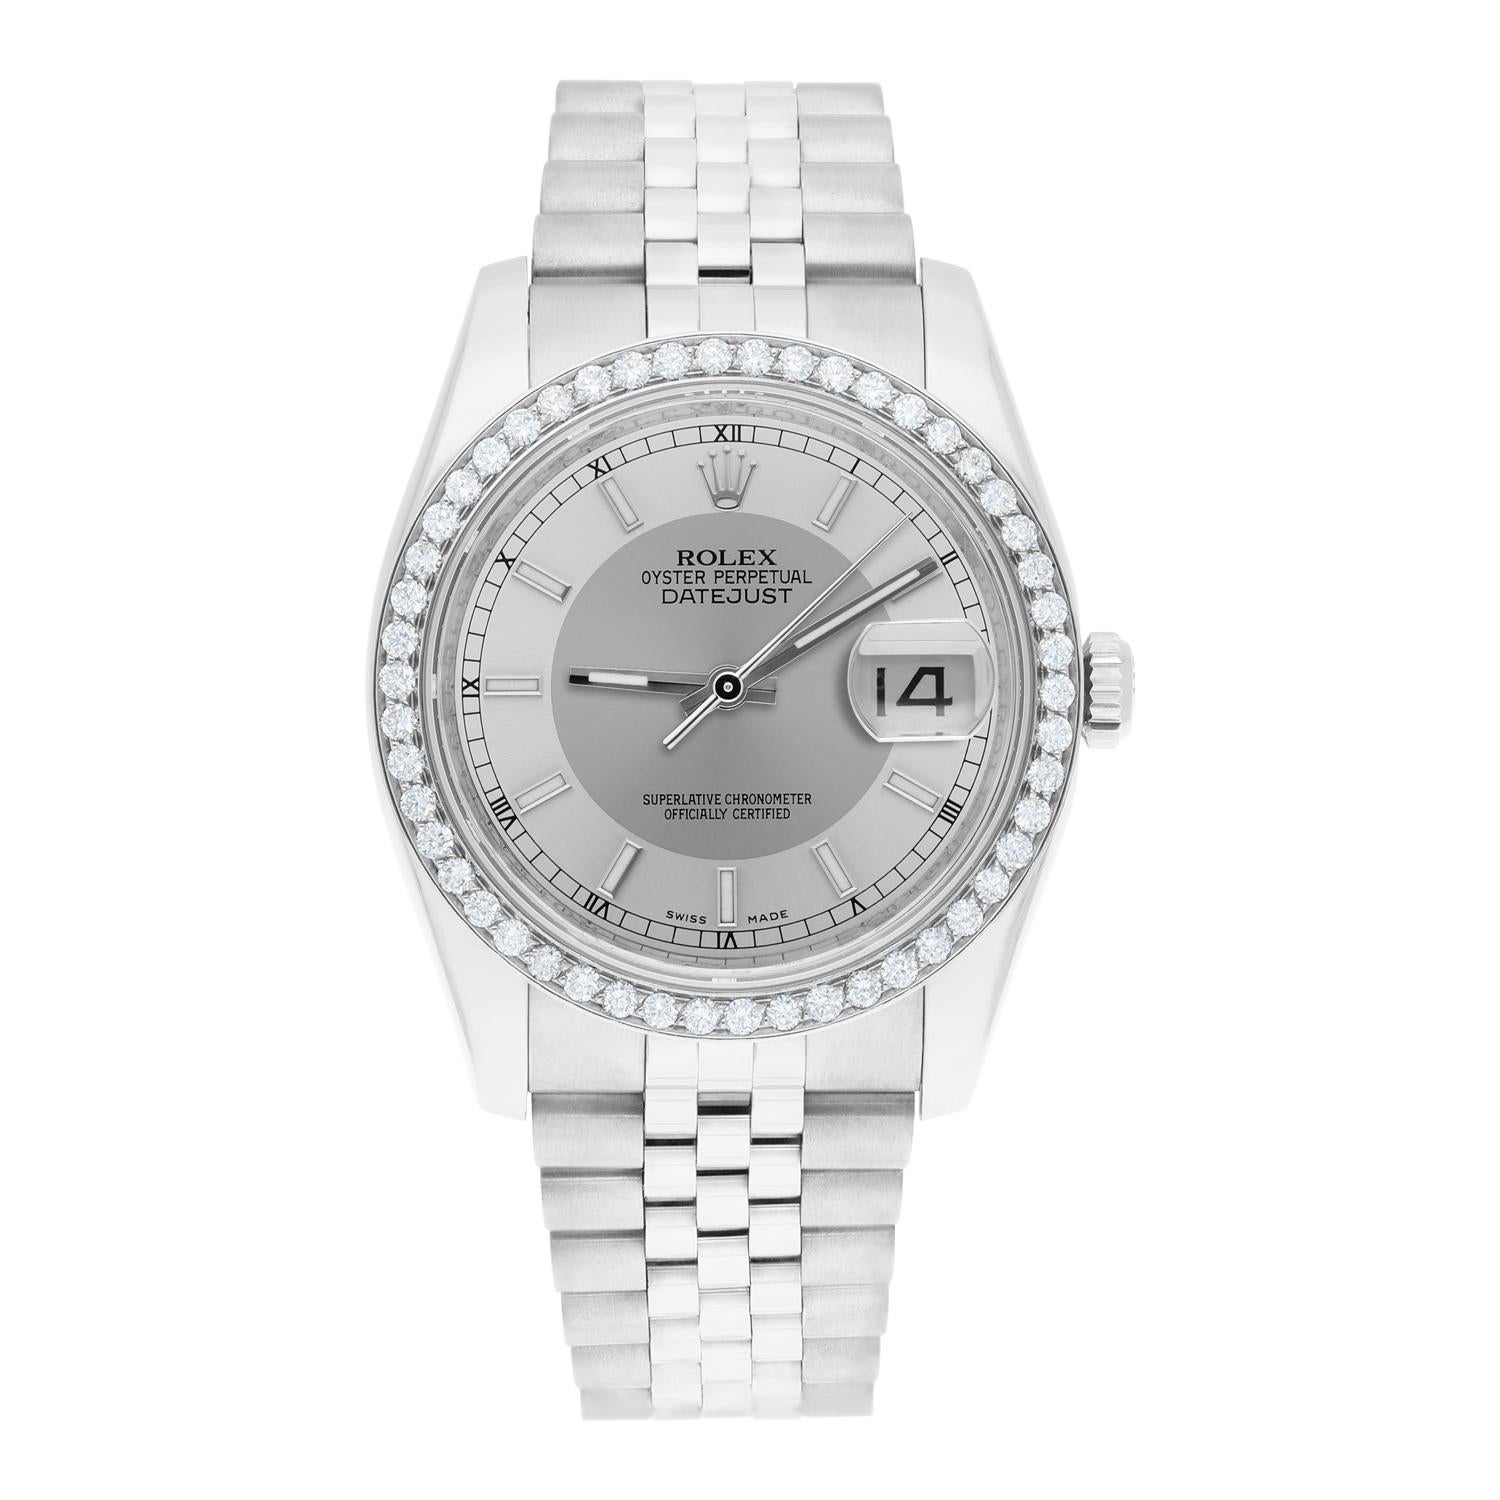 Brand: Rolex
Series: Datejust 
Model: 116234
Case Diameter: 36 mm
Bracelet: Jubilee band; stainless steel
Bezel: Custom Diamond Set
Dial: Silver Tuxedo
Carat Weight: 1.32 carats in total diamond weight
The sale includes a Rolex box and an appraisal